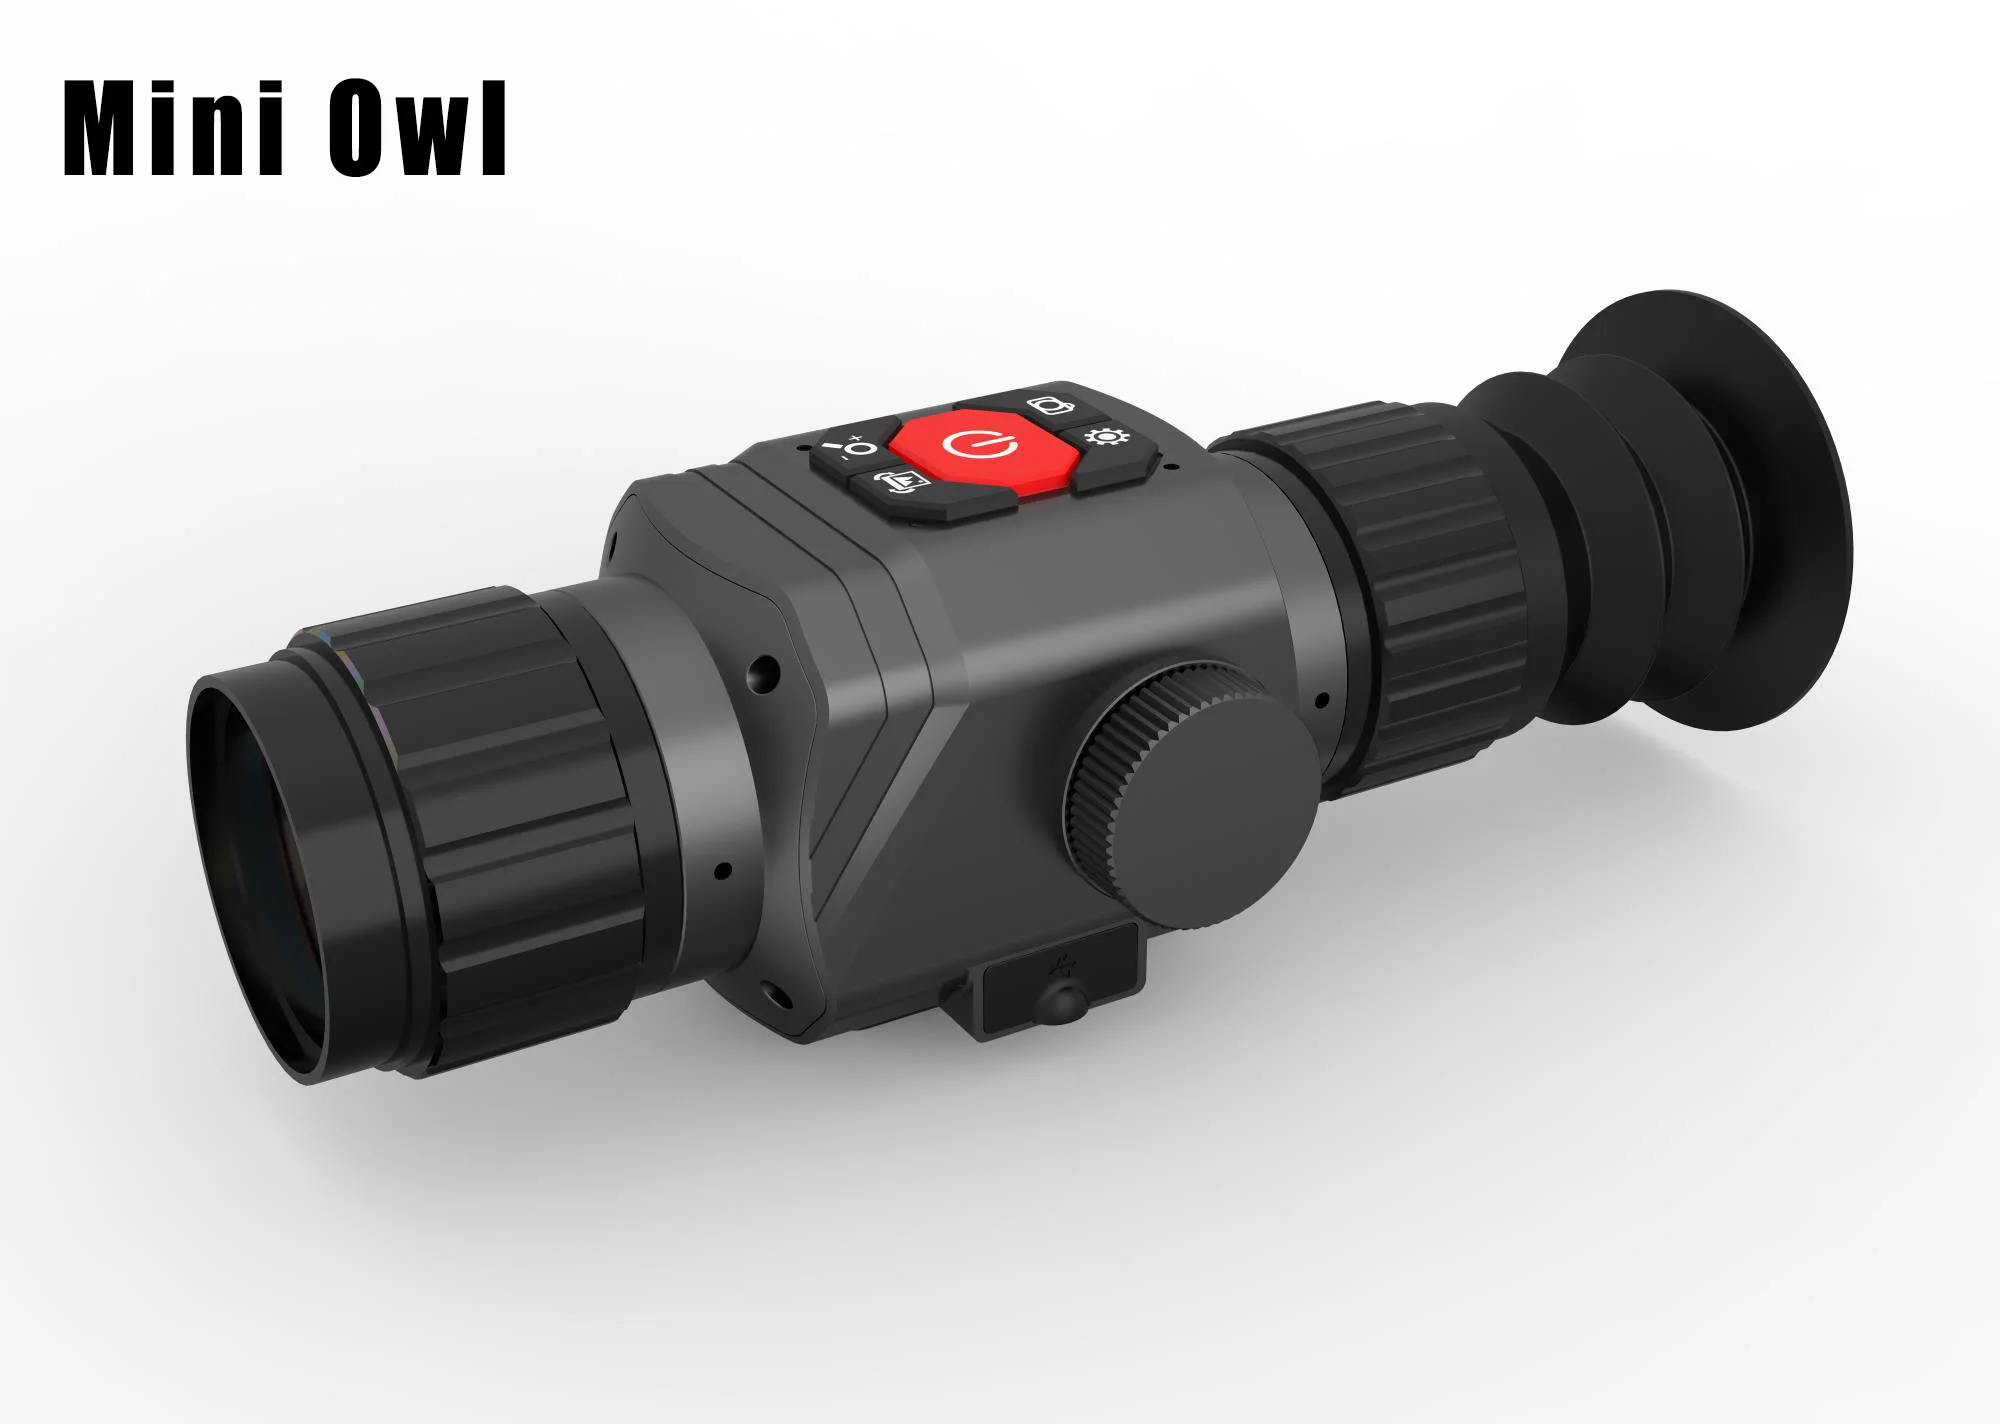 Mini Owl  Thermal Vision Night Viewer IR Camera Device Infrared Thermos Hunting Monocular Telesope Sight with Reticle Cross